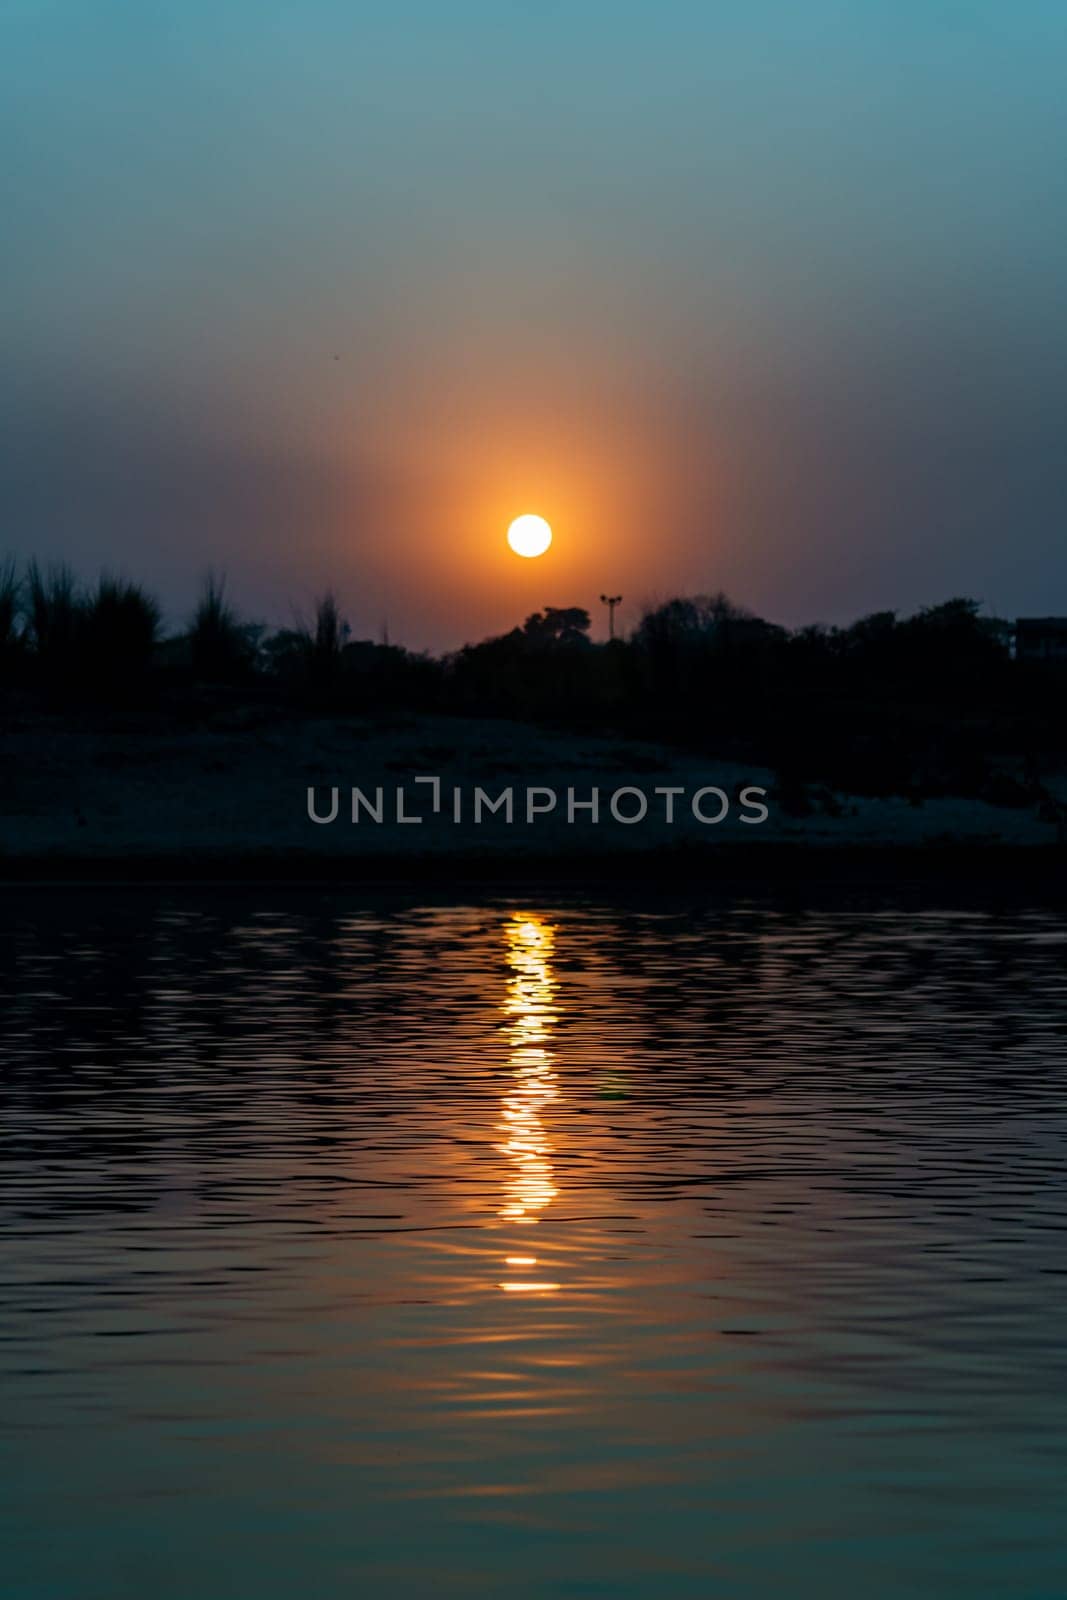 sunset over the river, End of the afternoon, Nature, Landscape, selective focus